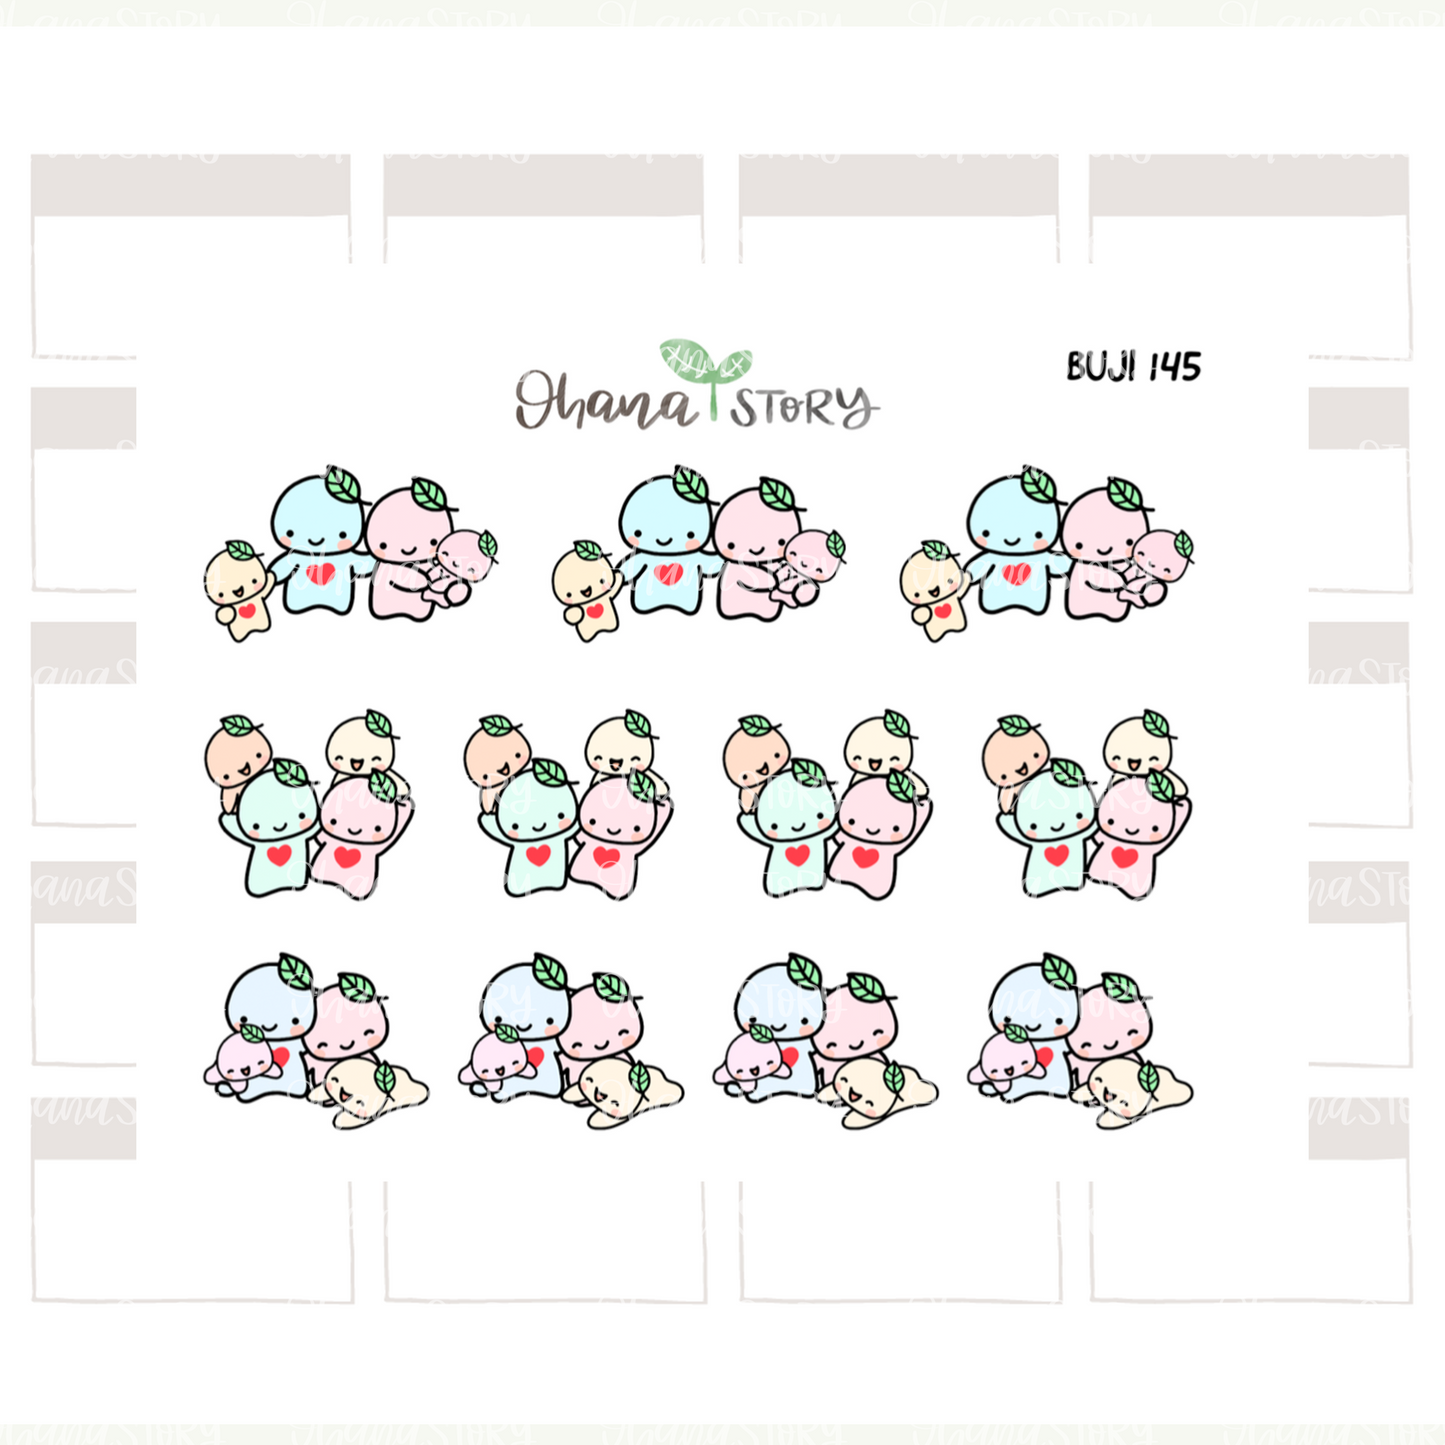 BUJI 145 | Family Time With 2 Kids | Hand Drawn Planner Stickers